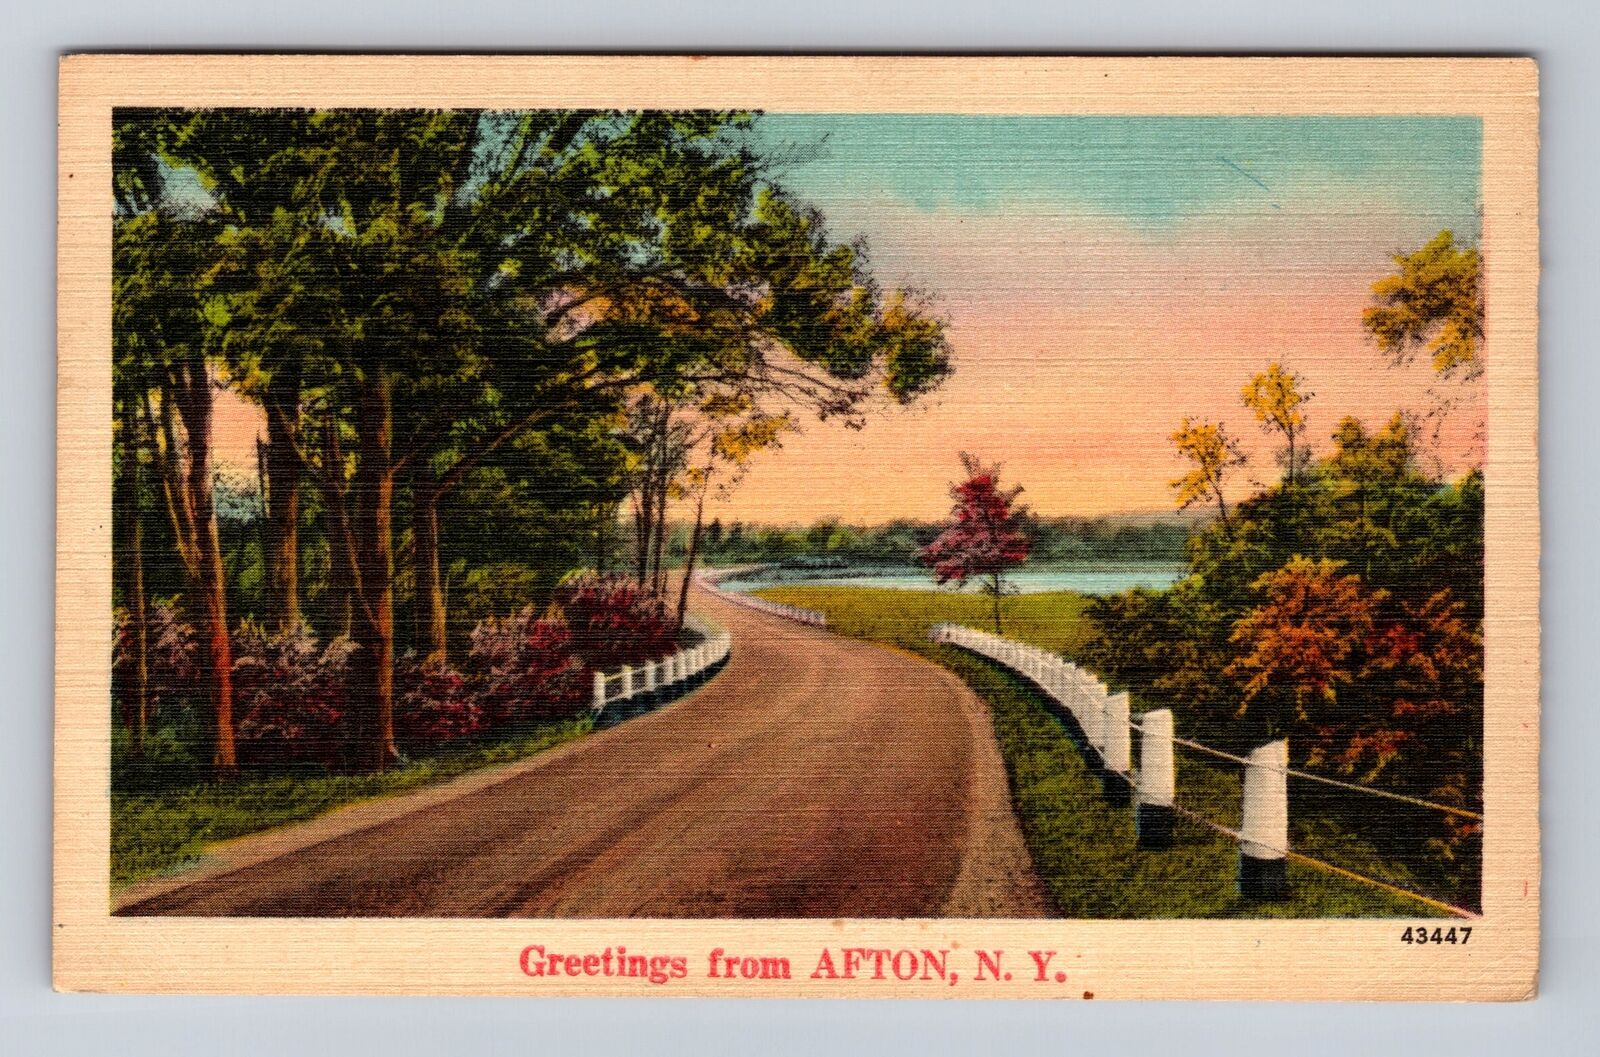 Afton NY-New York, General Greetings, Scenic Roadside, Antique Vintage Postcard